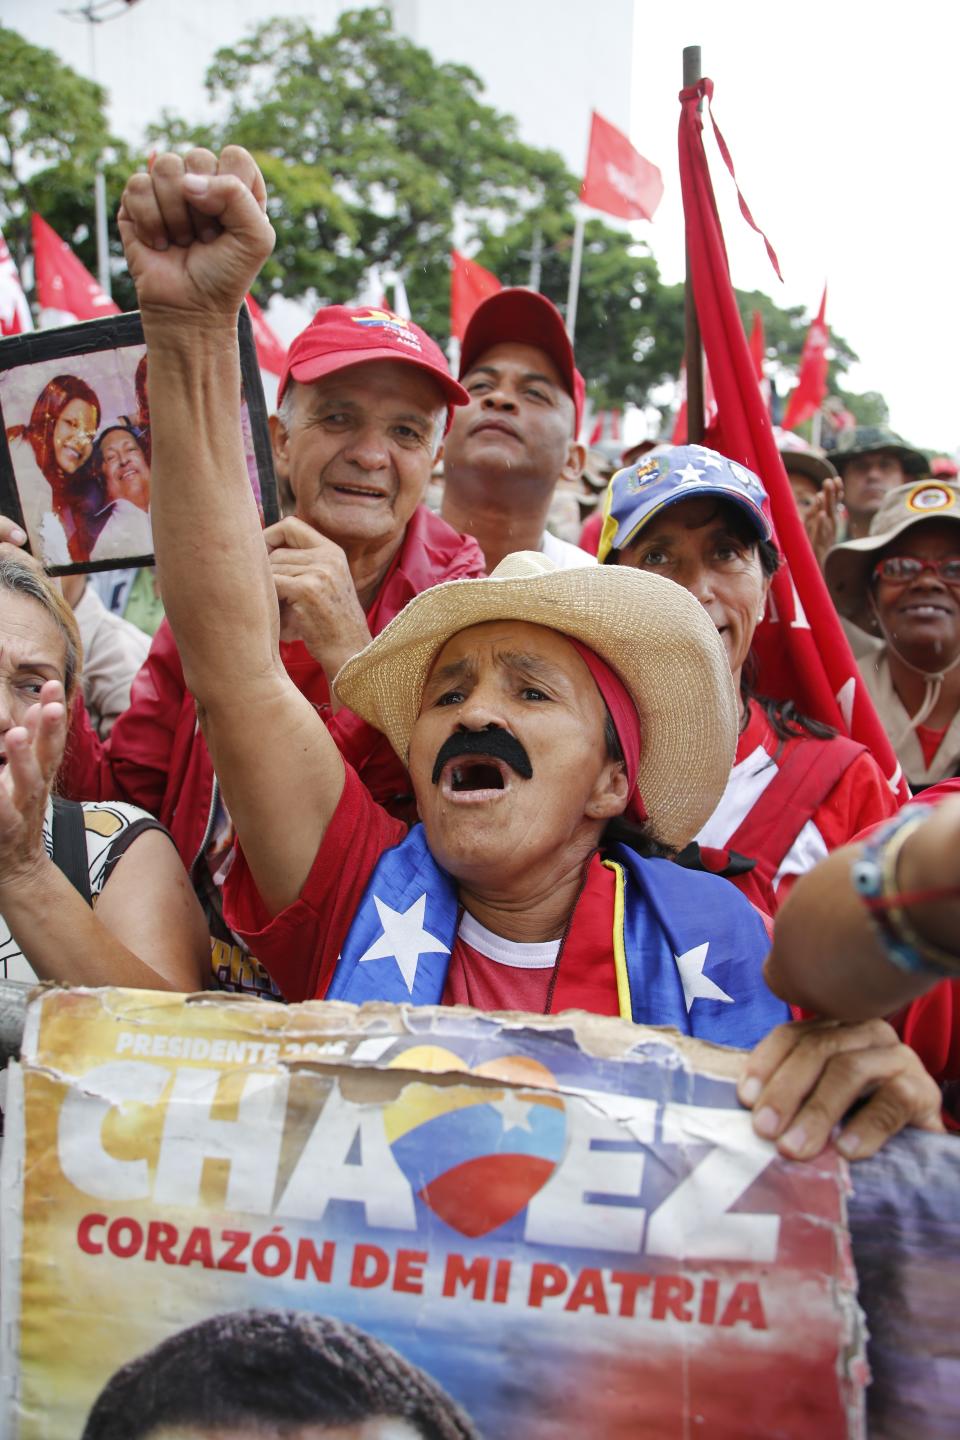 A supporter of Venezuela's President Nicolas Maduro, a fake mustache emulating that of Maduro's, takes part in a protest against Michele Bachelet, U.N. high commissioner for human rights, in Caracas, Venezuela, Saturday, July 13, 2019. Bachelet recently published a report accusing Venezuelan officials of human rights abuses, including extrajudicial killings and measures to erode democratic institutions. (AP Photo/Leonardo Fernandez)